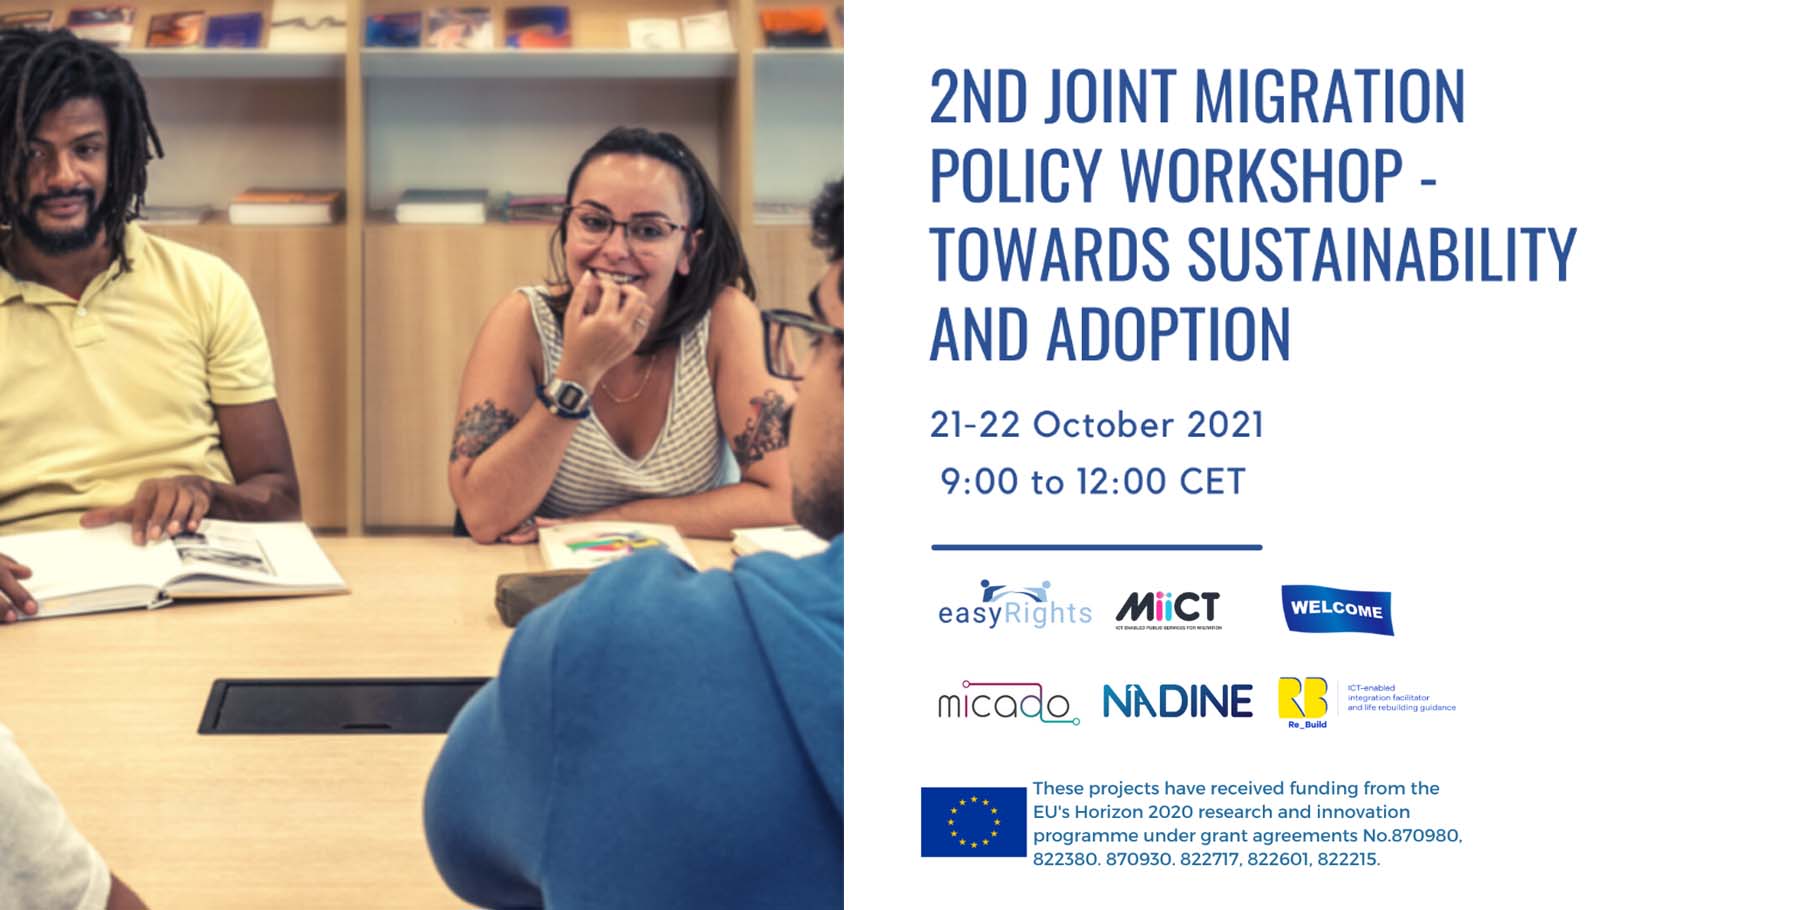 The Horizon 2020 funded NADINE project presents the 2nd Joint Migration Policy Workshop: Towards sustainability and adoption